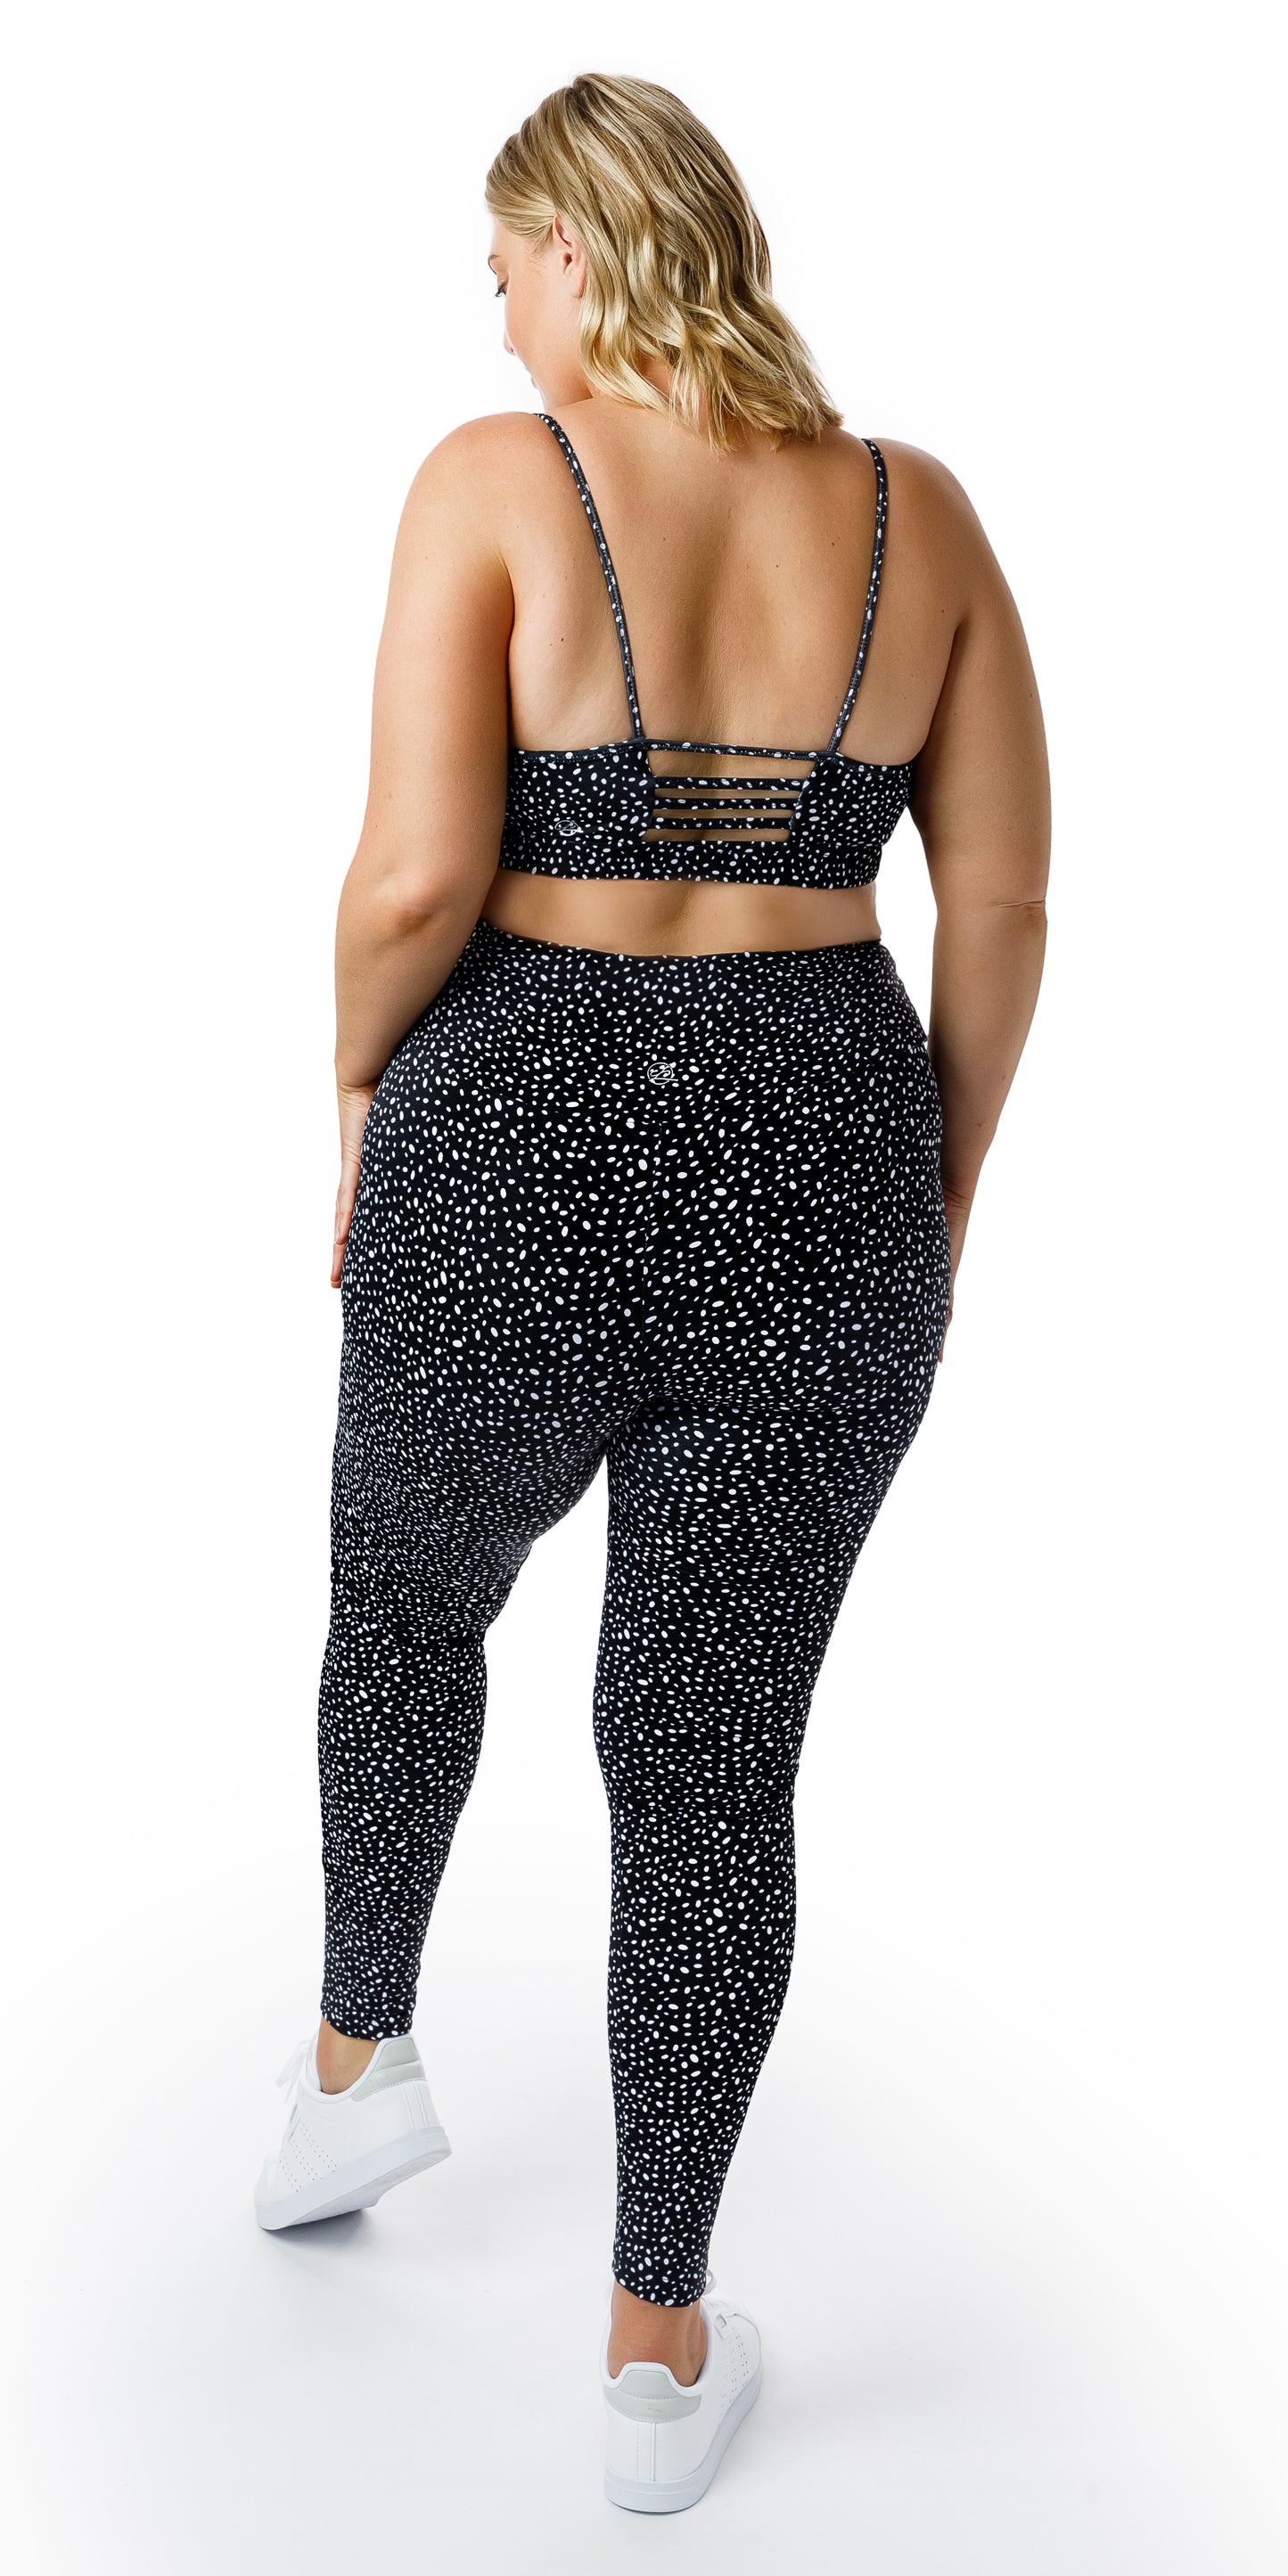 Full body back view of lady in black Star Dust Momentum Bra and matching leggings putting left foot forward and hand on lap